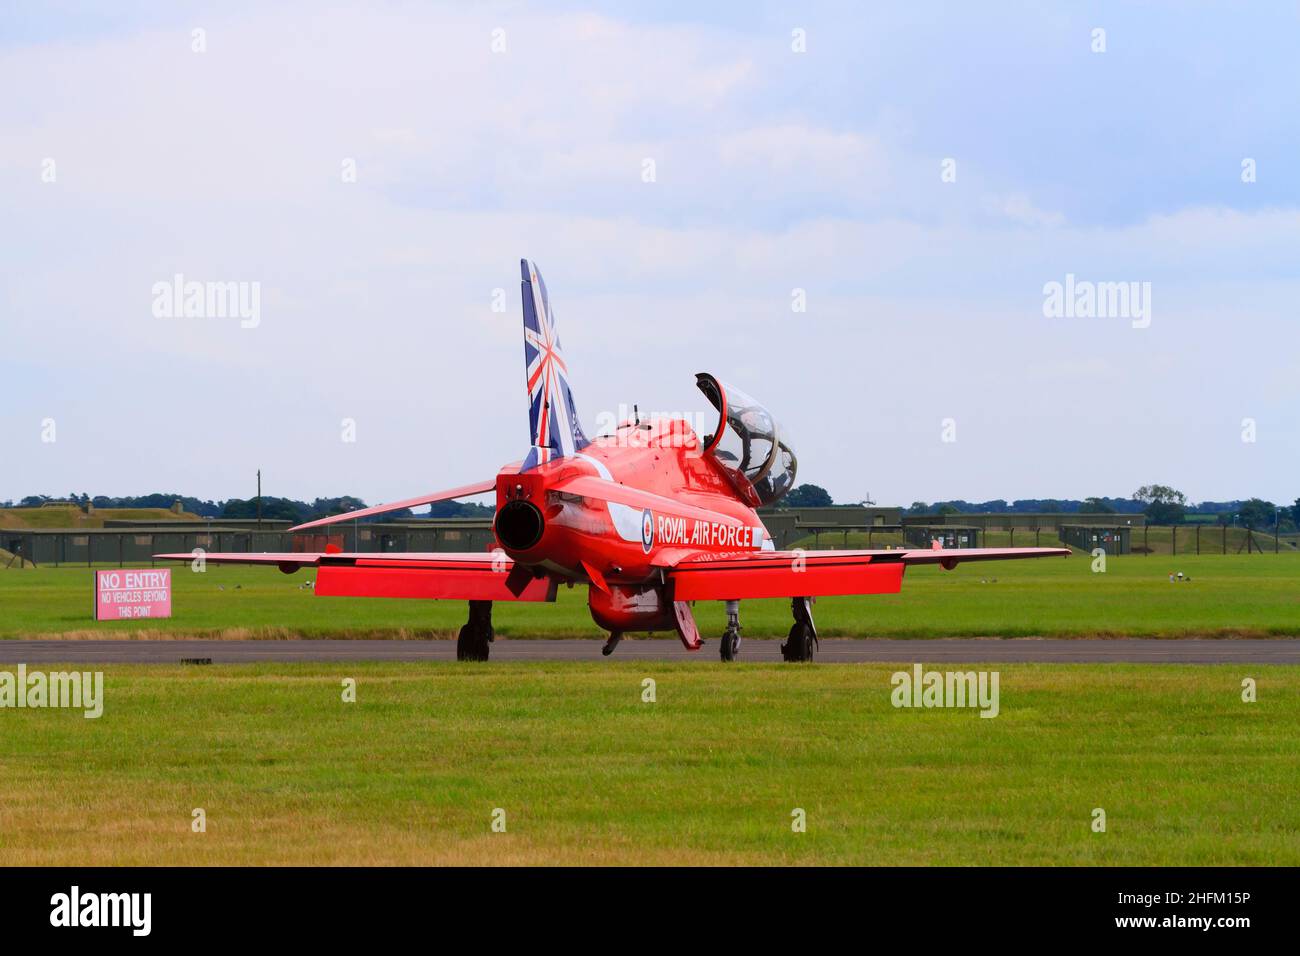 BAE Hawk T1a aircraft of the Royal Air Force aerobatic display team, The Red Arrows, with the 50th Anniversity tail markings. On the ground with the c Stock Photo